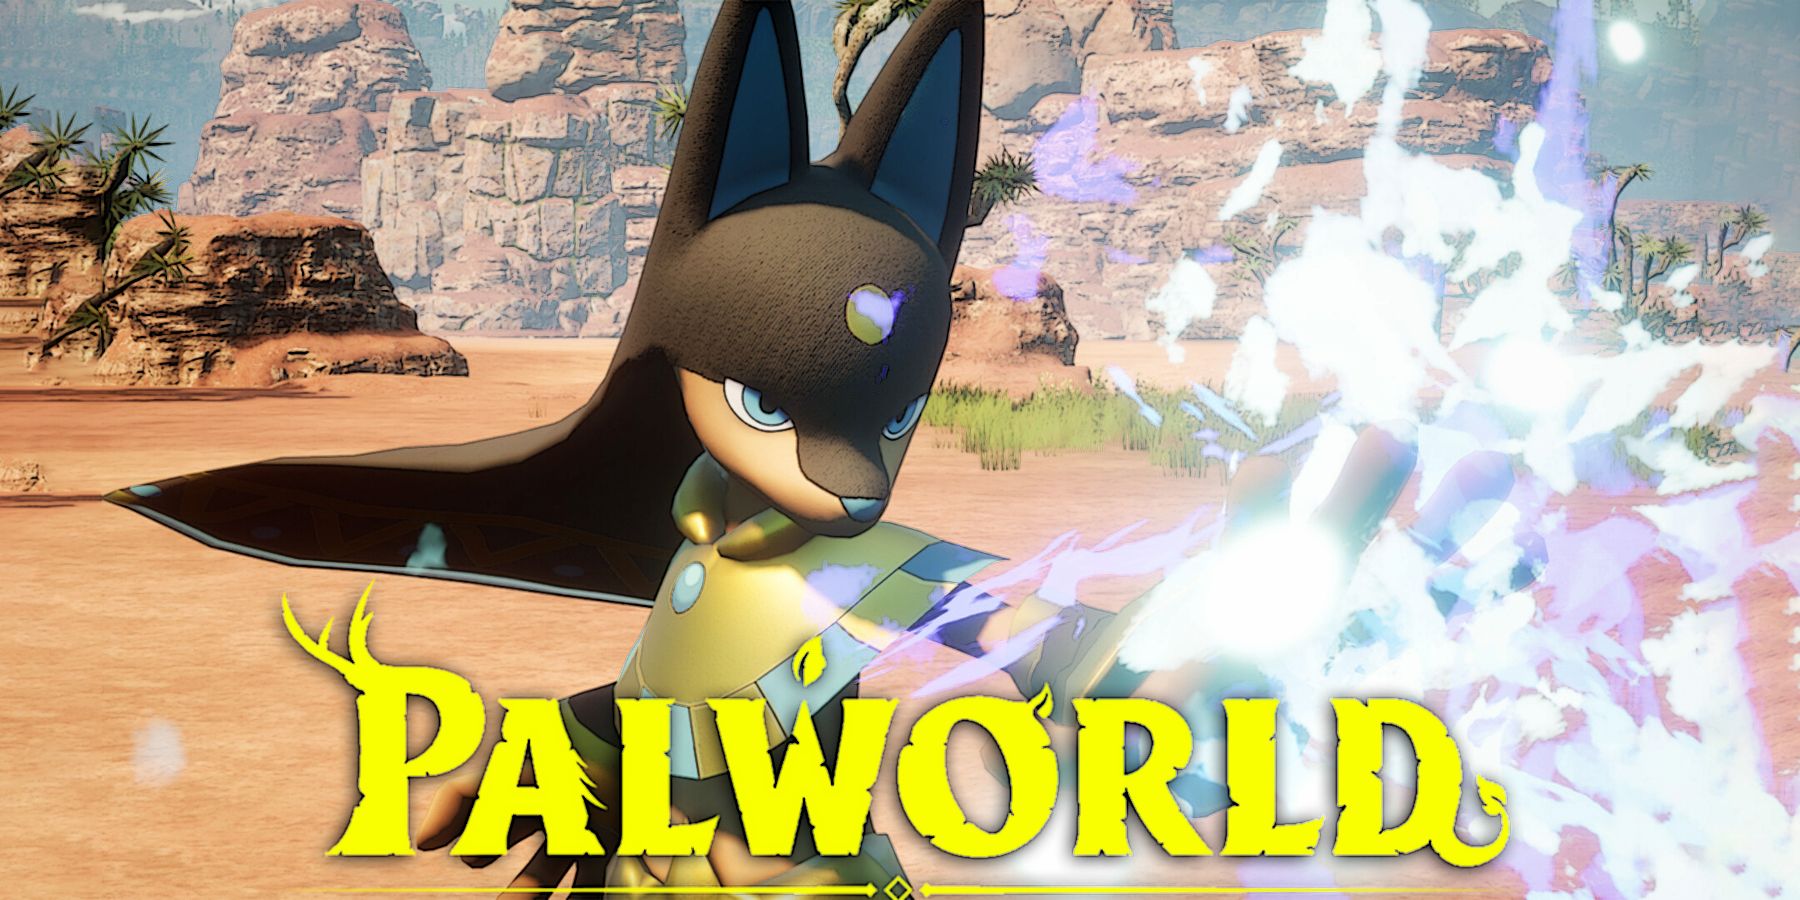 Palworld sales numbers: How many people are playing and paying